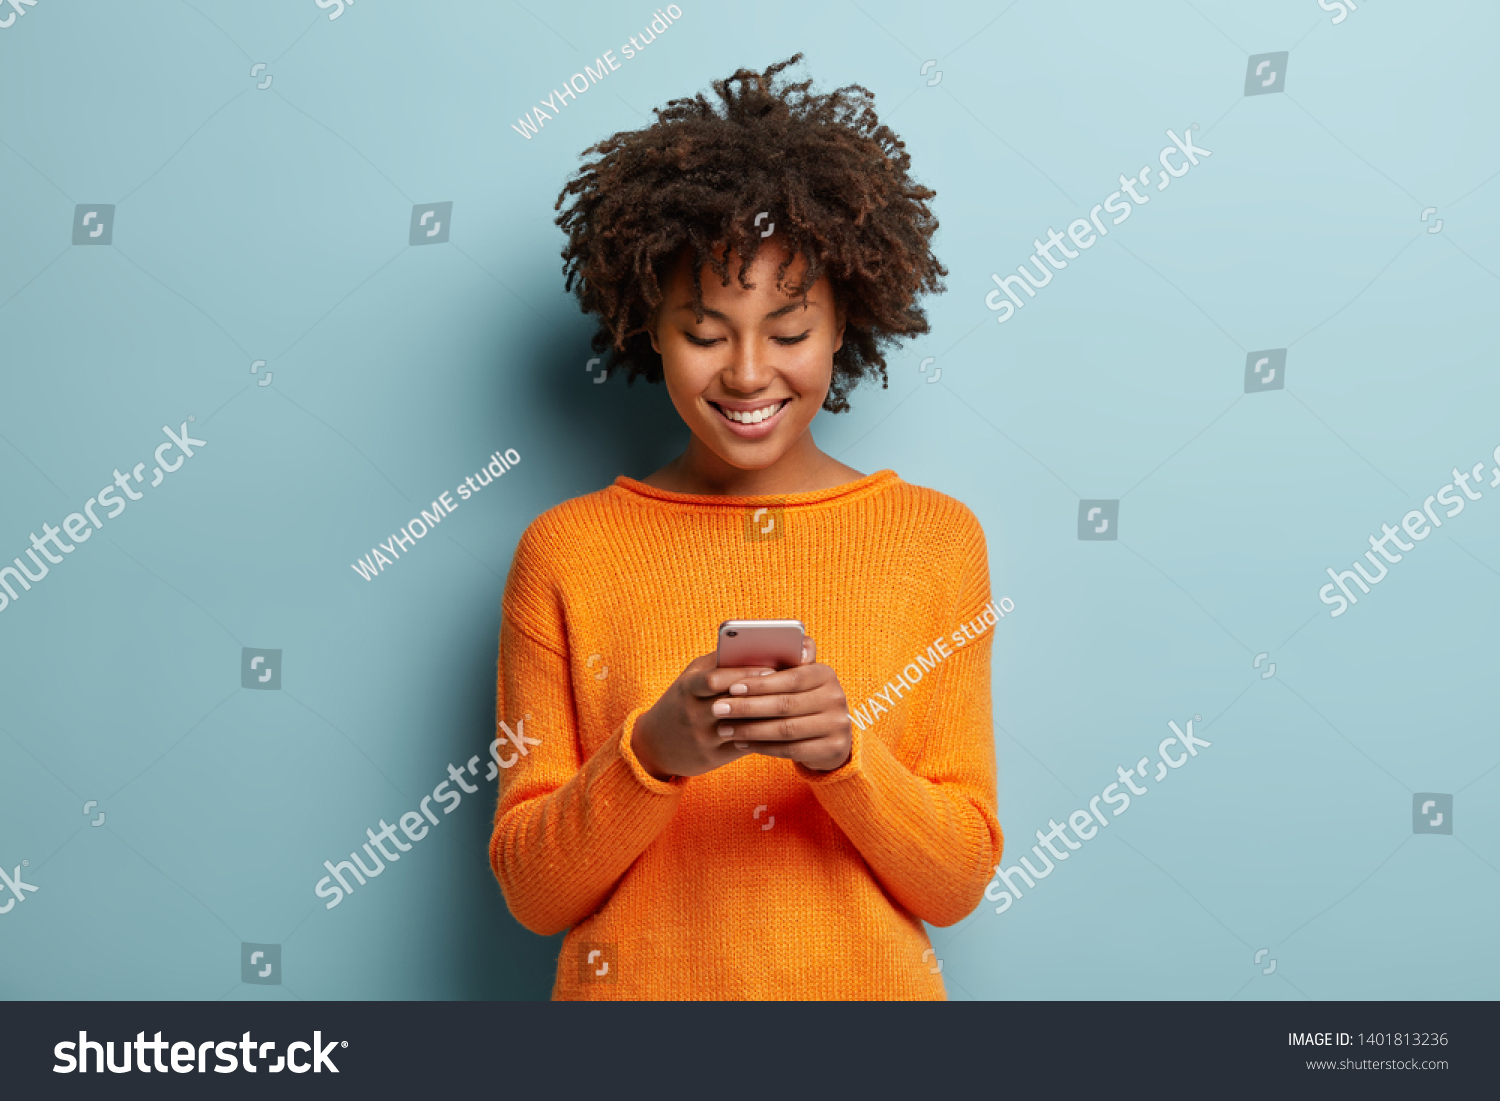 Satisfied hipster girl with Afro haircut, types text message on cell phone, enjoys online communication, types feedback, wears orange jumper, isolated on blue studio wall. Technology concept #1401813236